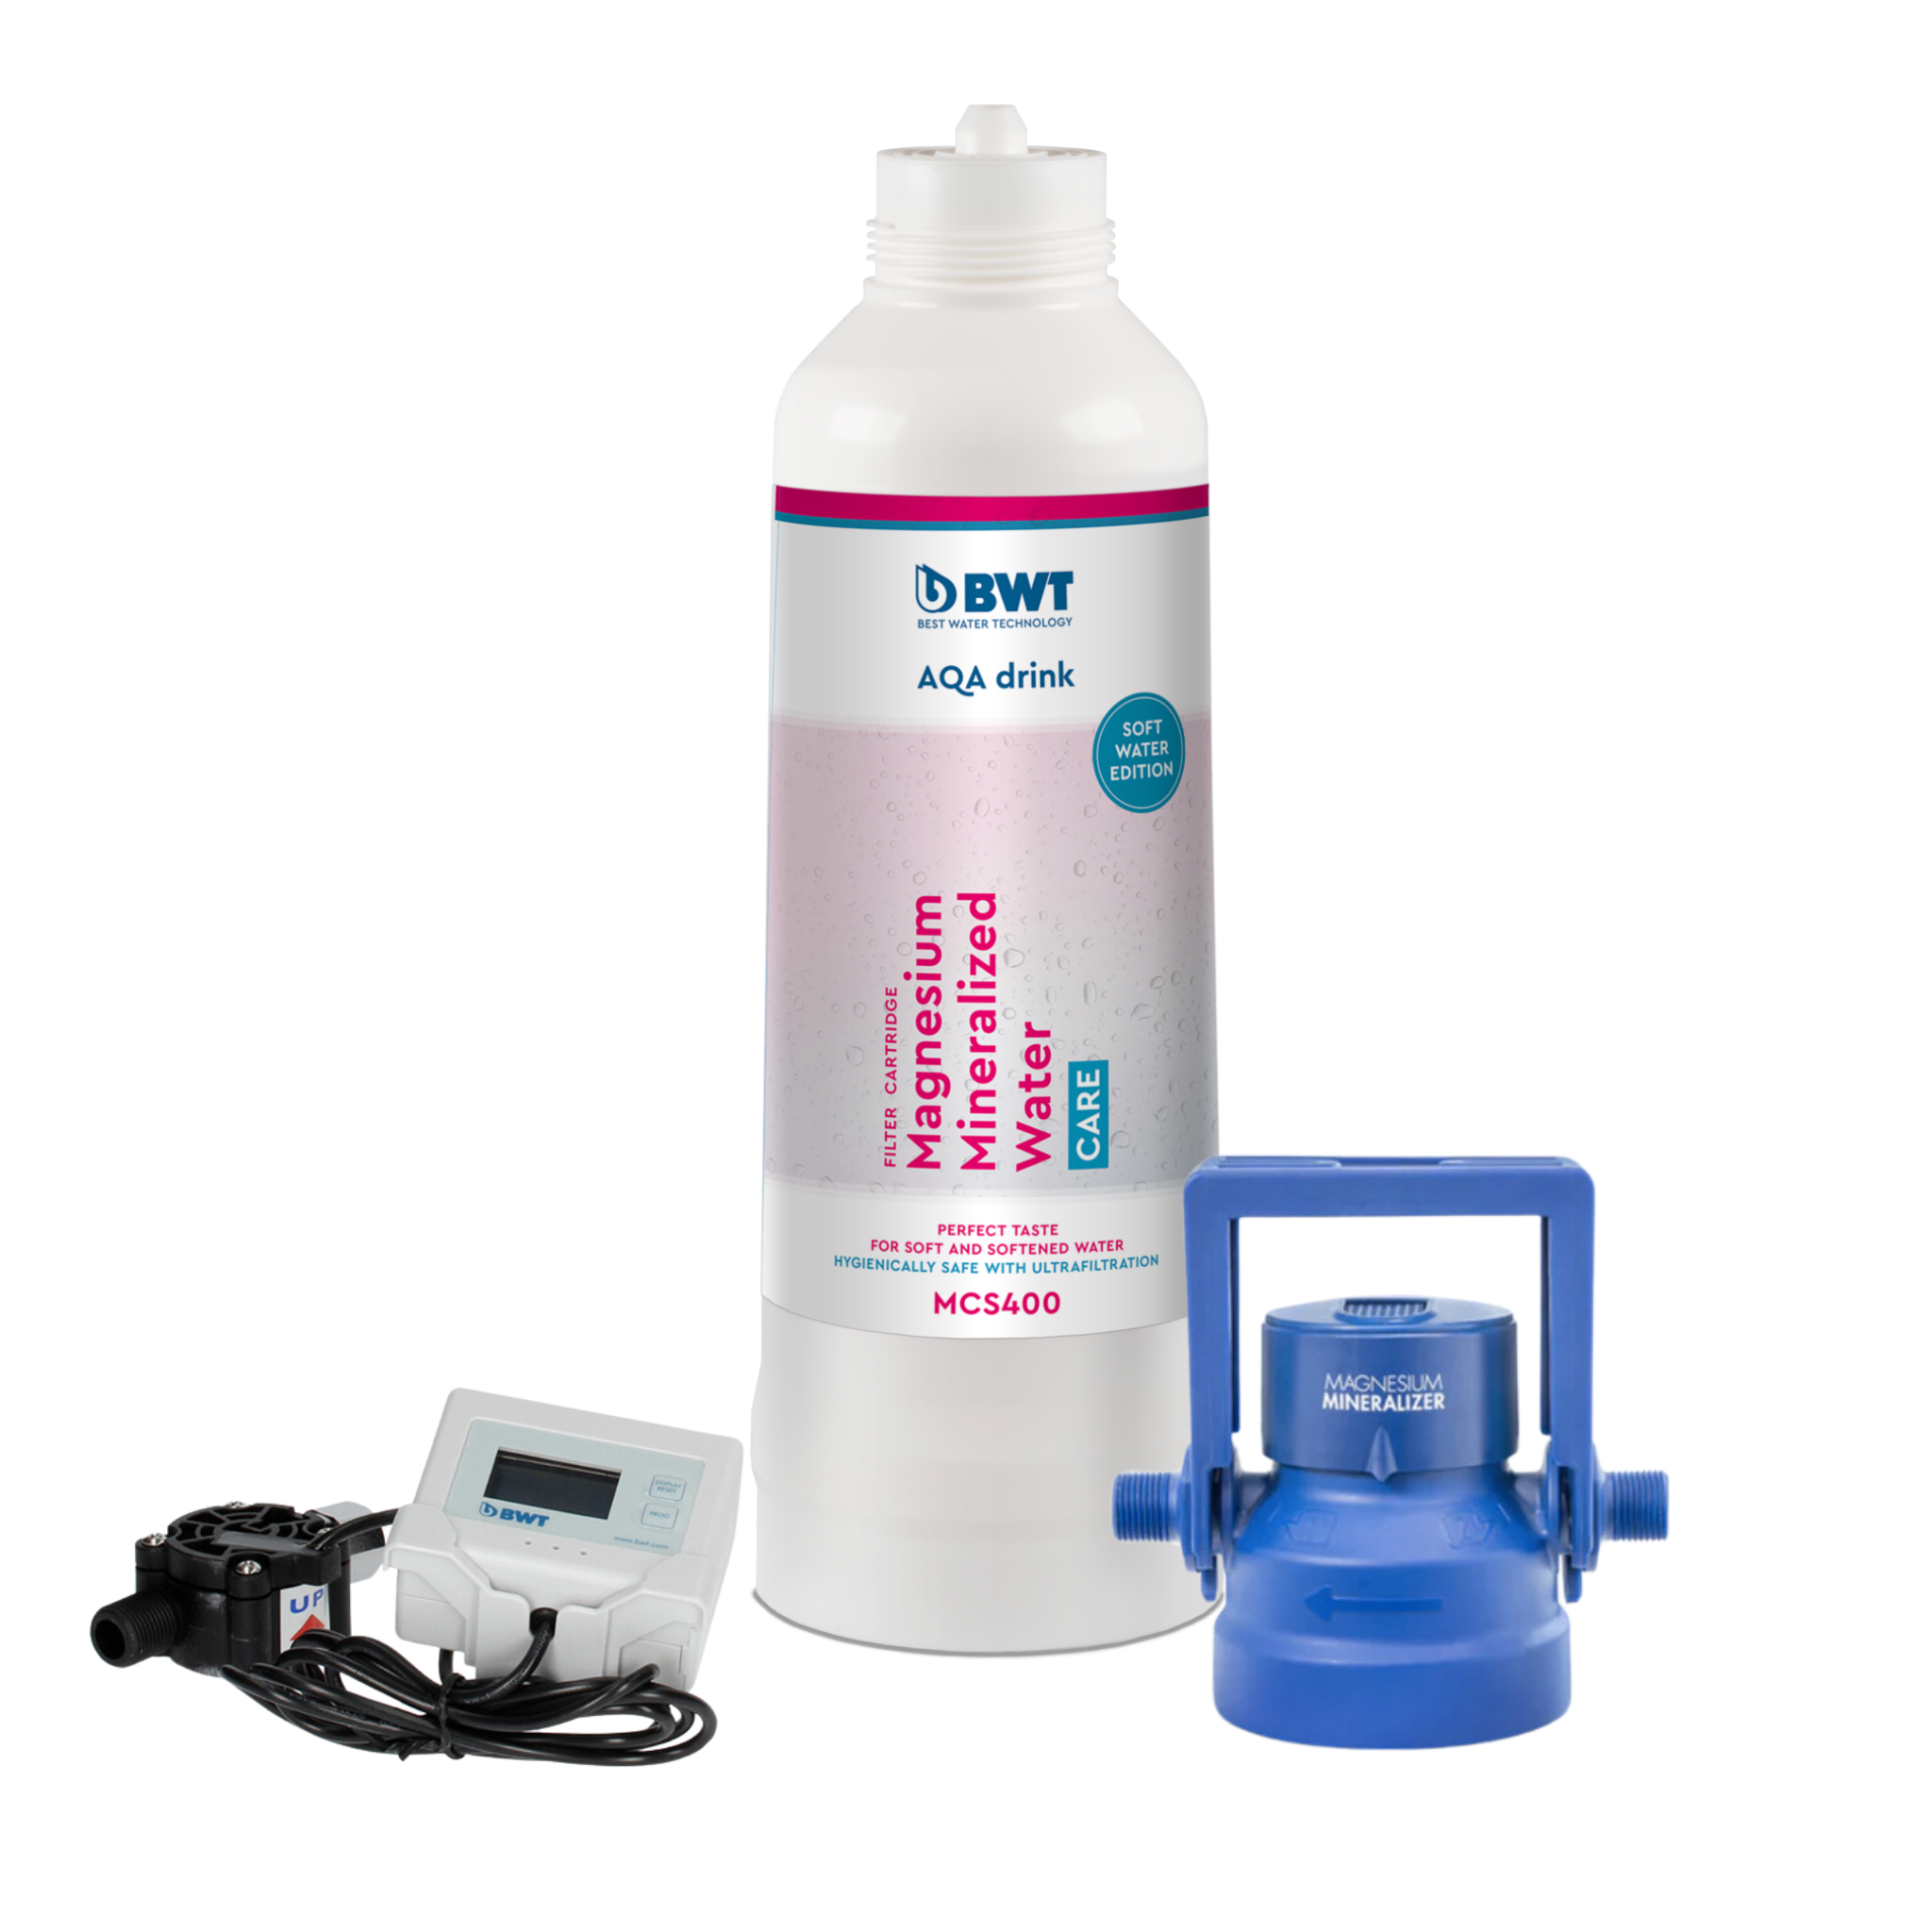 BWT AQA drink MCS400 filter starter set | For soft water areas or after domestic water softening systems - enrich it with Magnesium, removes 99.99% of bacteria and microplastics.